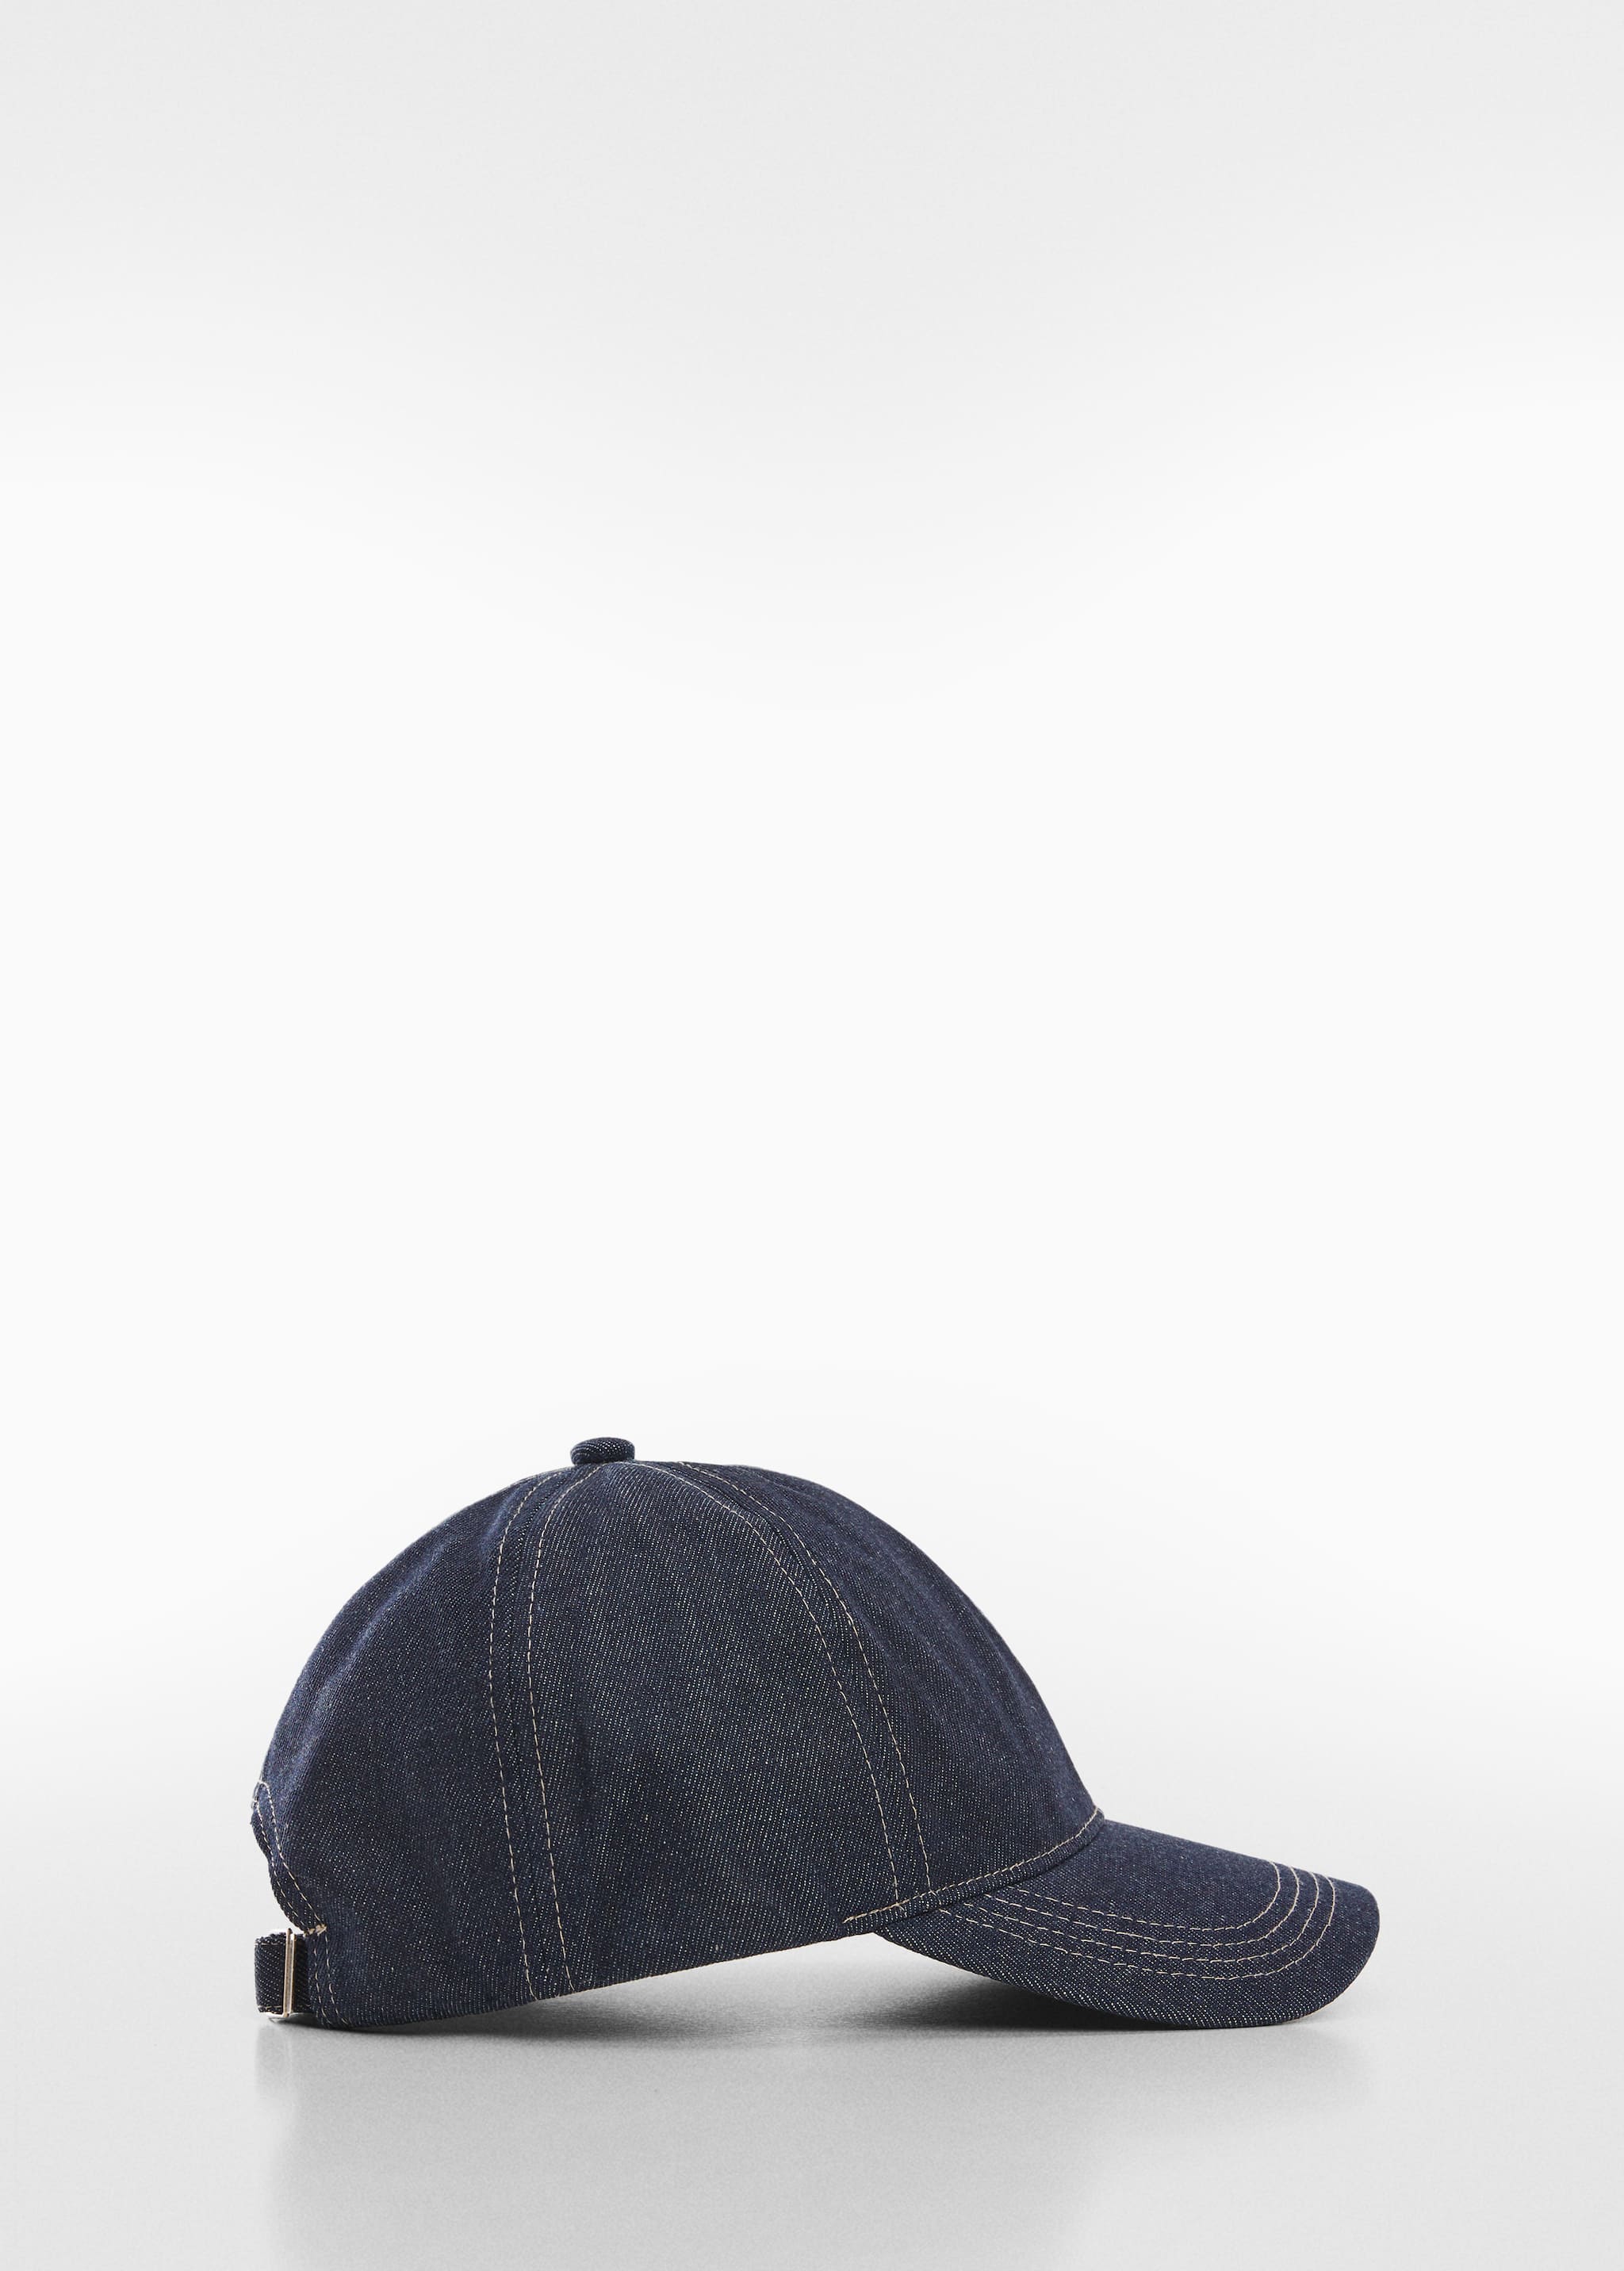 Denim cap with visor - Article without model